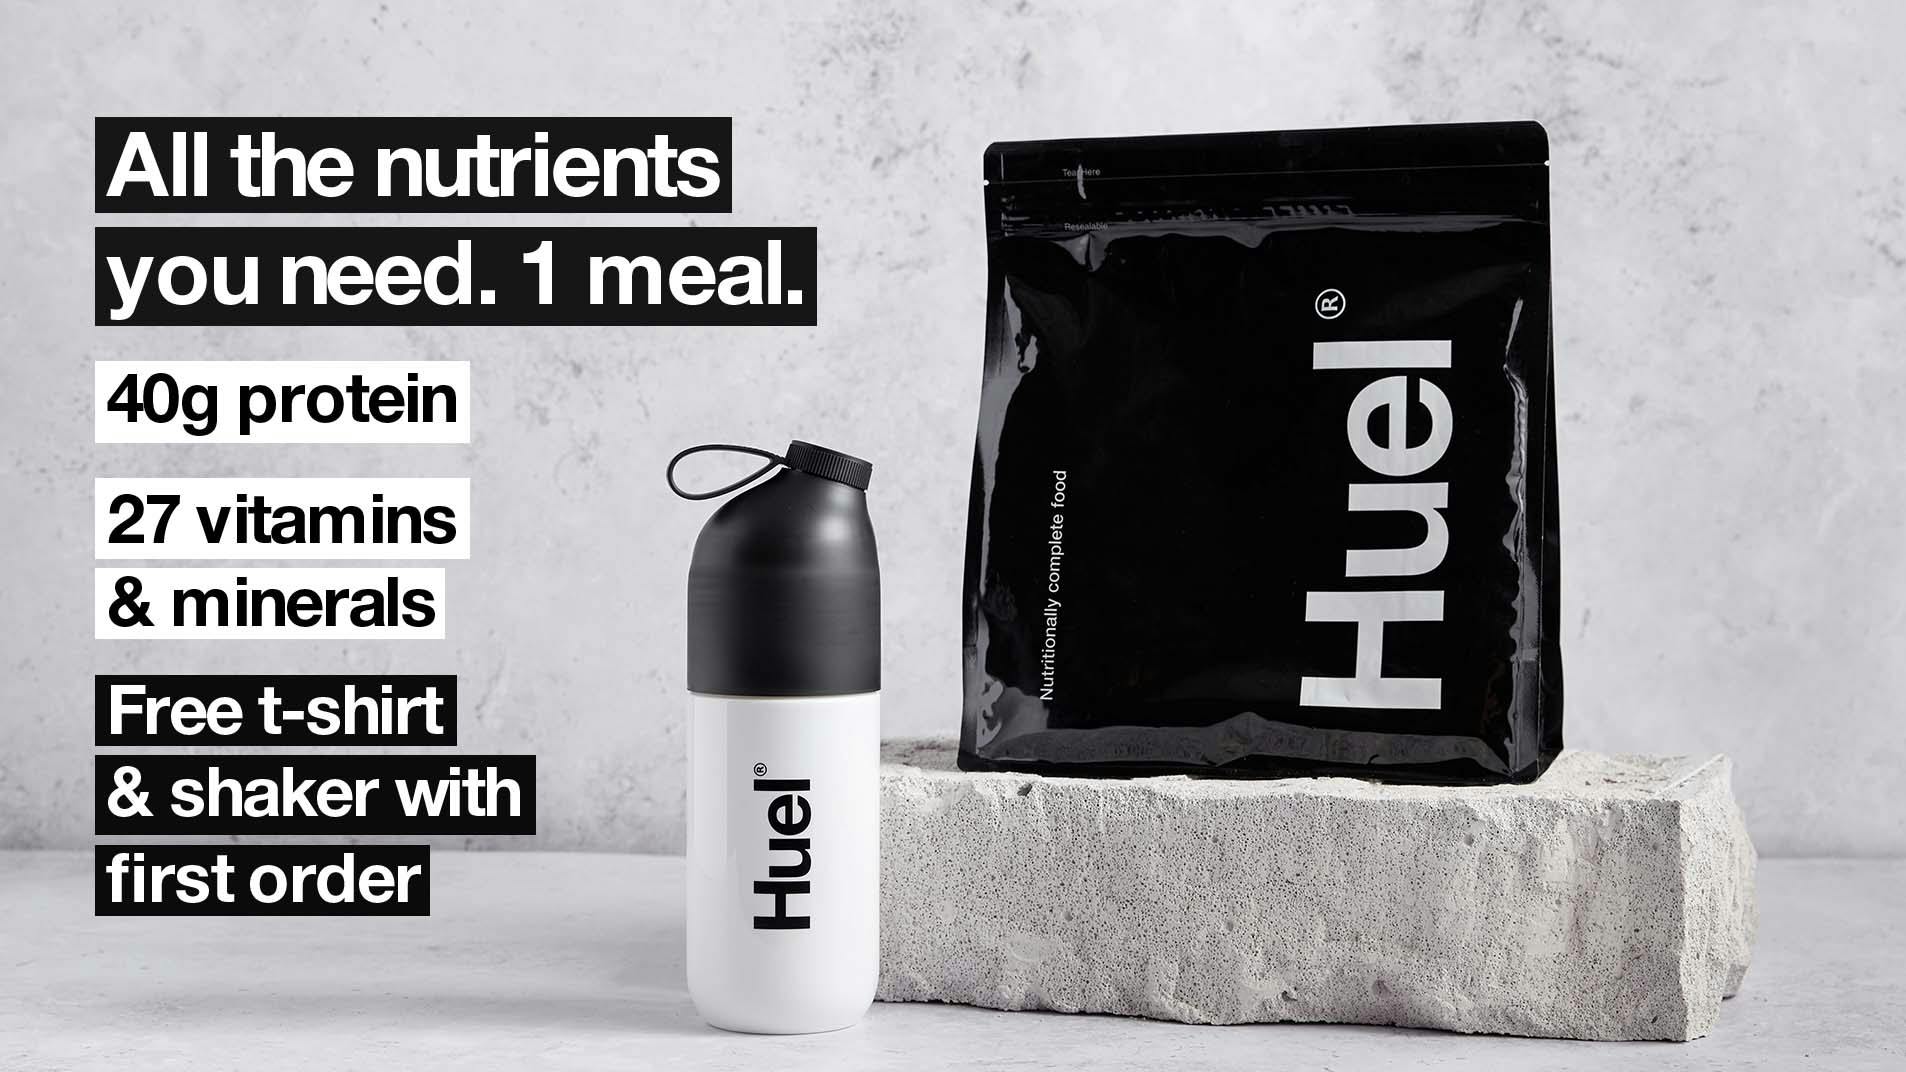 New Huel Black Edition, Huel Black Edition - 50% less carbs, 33% more  protein and zero artificial sweeteners. In addition to Huel v3.0, the  latest version of our original Huel, By Huel